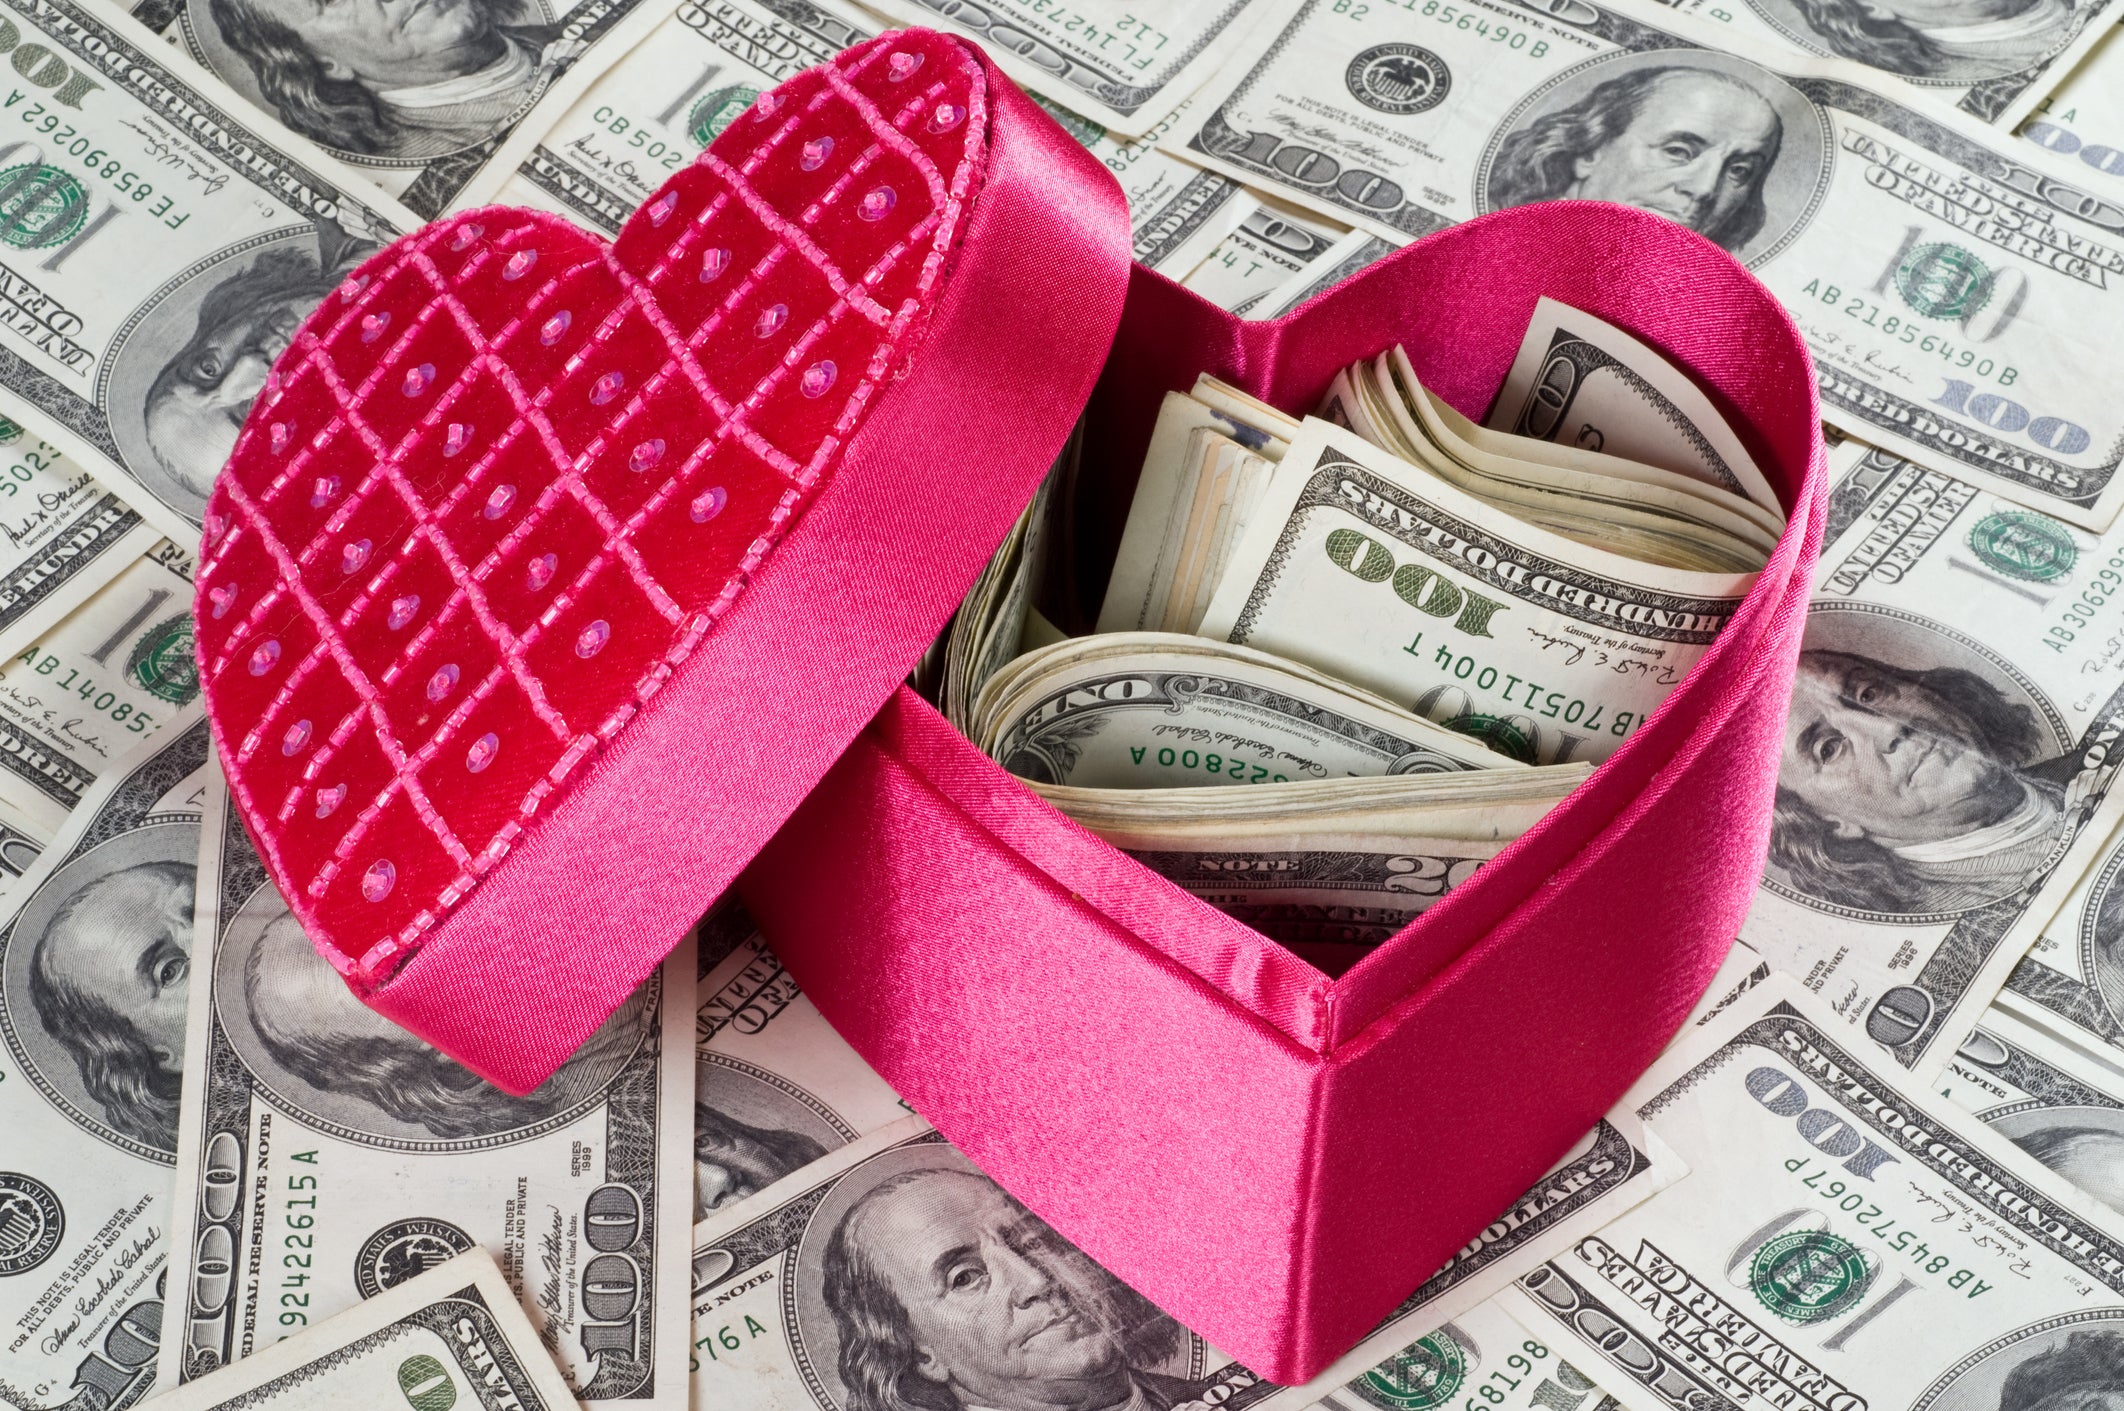 New Bae? This Is How Much You Should Spend On Their Valentine's Day Gift